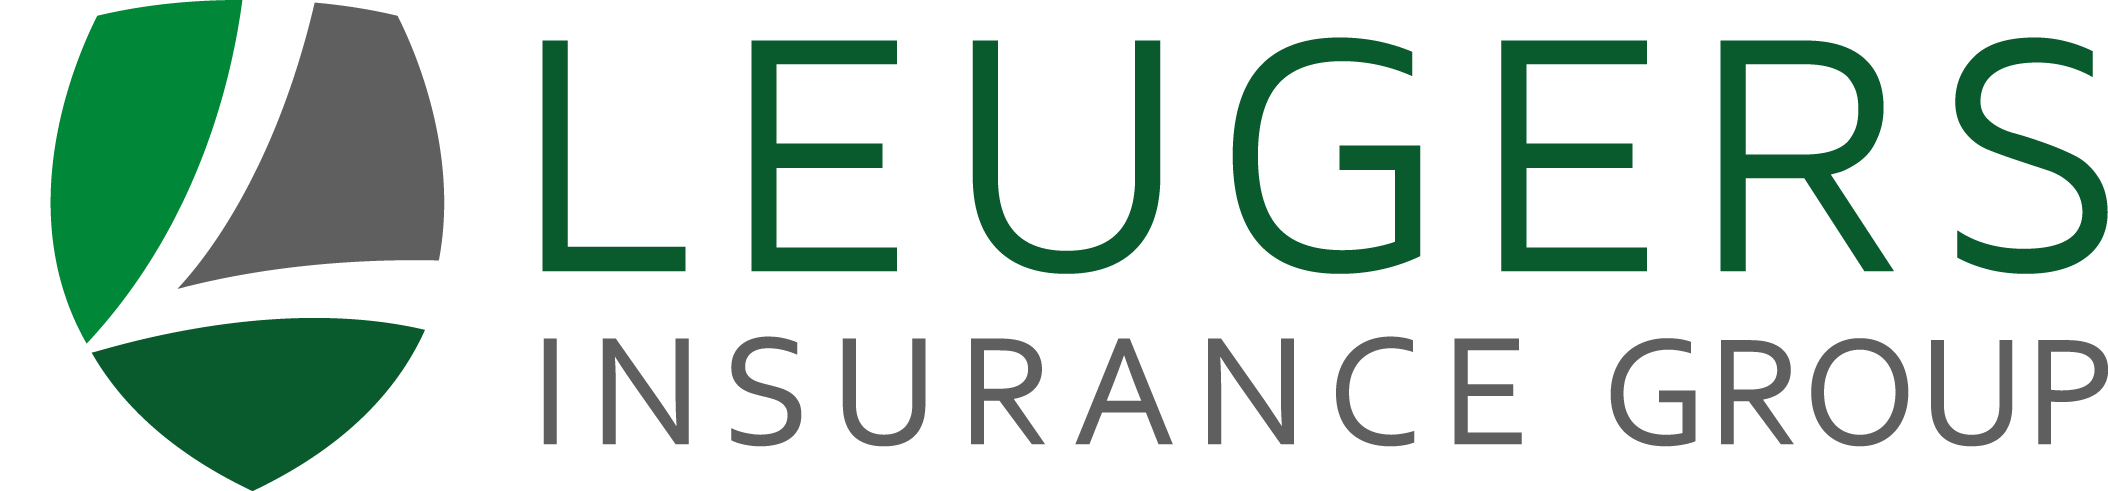 Leugers Insurance Group